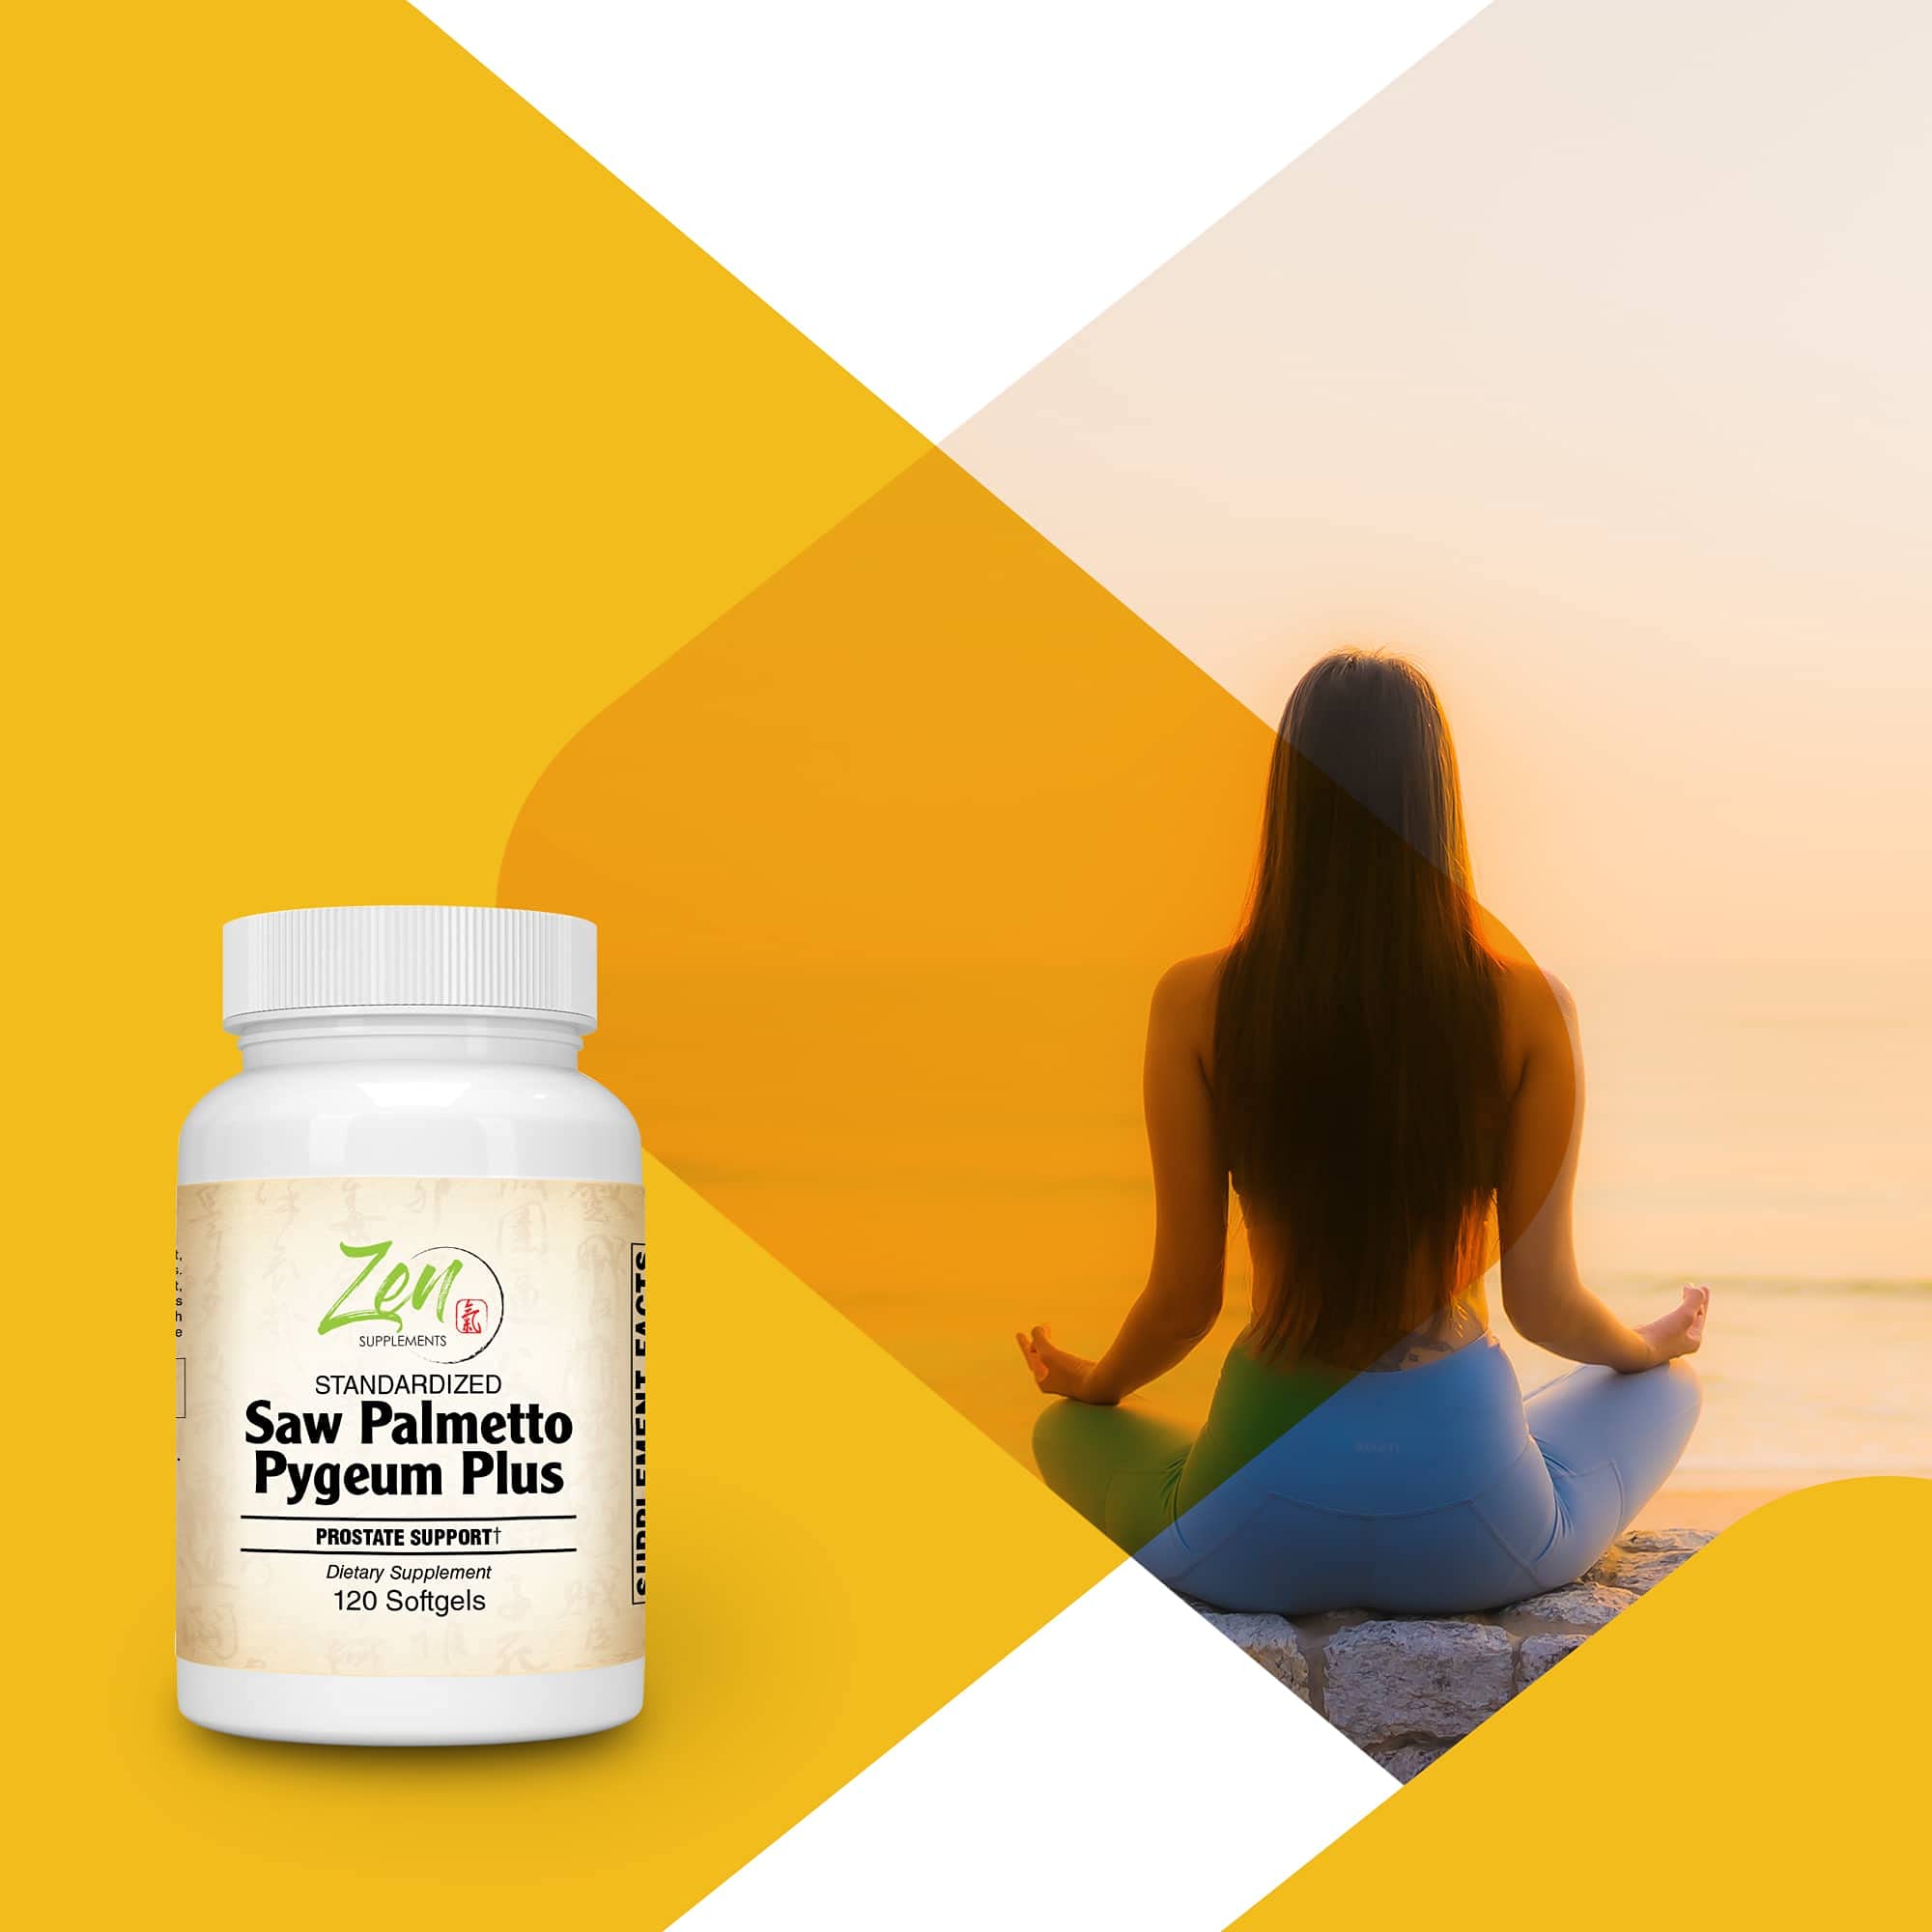 Zen Supplements - Saw Palmetto & Pygeum Plus - Prostate Support Supplement for Prostate & Urinary Tract Health Including Frequent Urination, Beta-Sitosterol Supports DHT Blocker for Hair Loss Prevention 120-Softgel